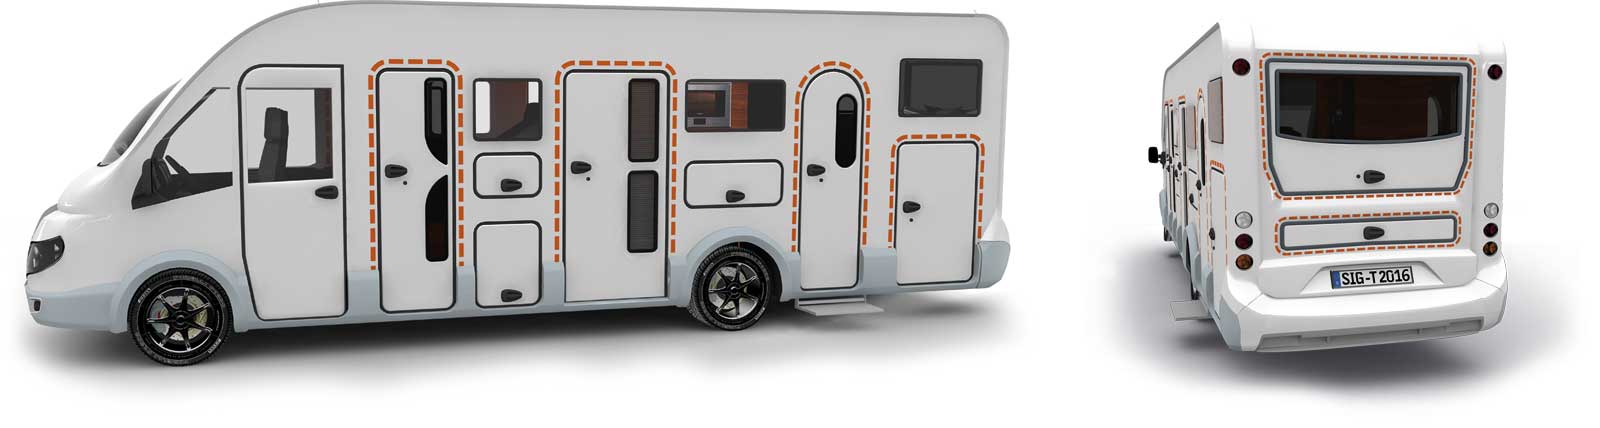 Satisfied tegos customers with custom built caravans, RVs, or expedition vehicles